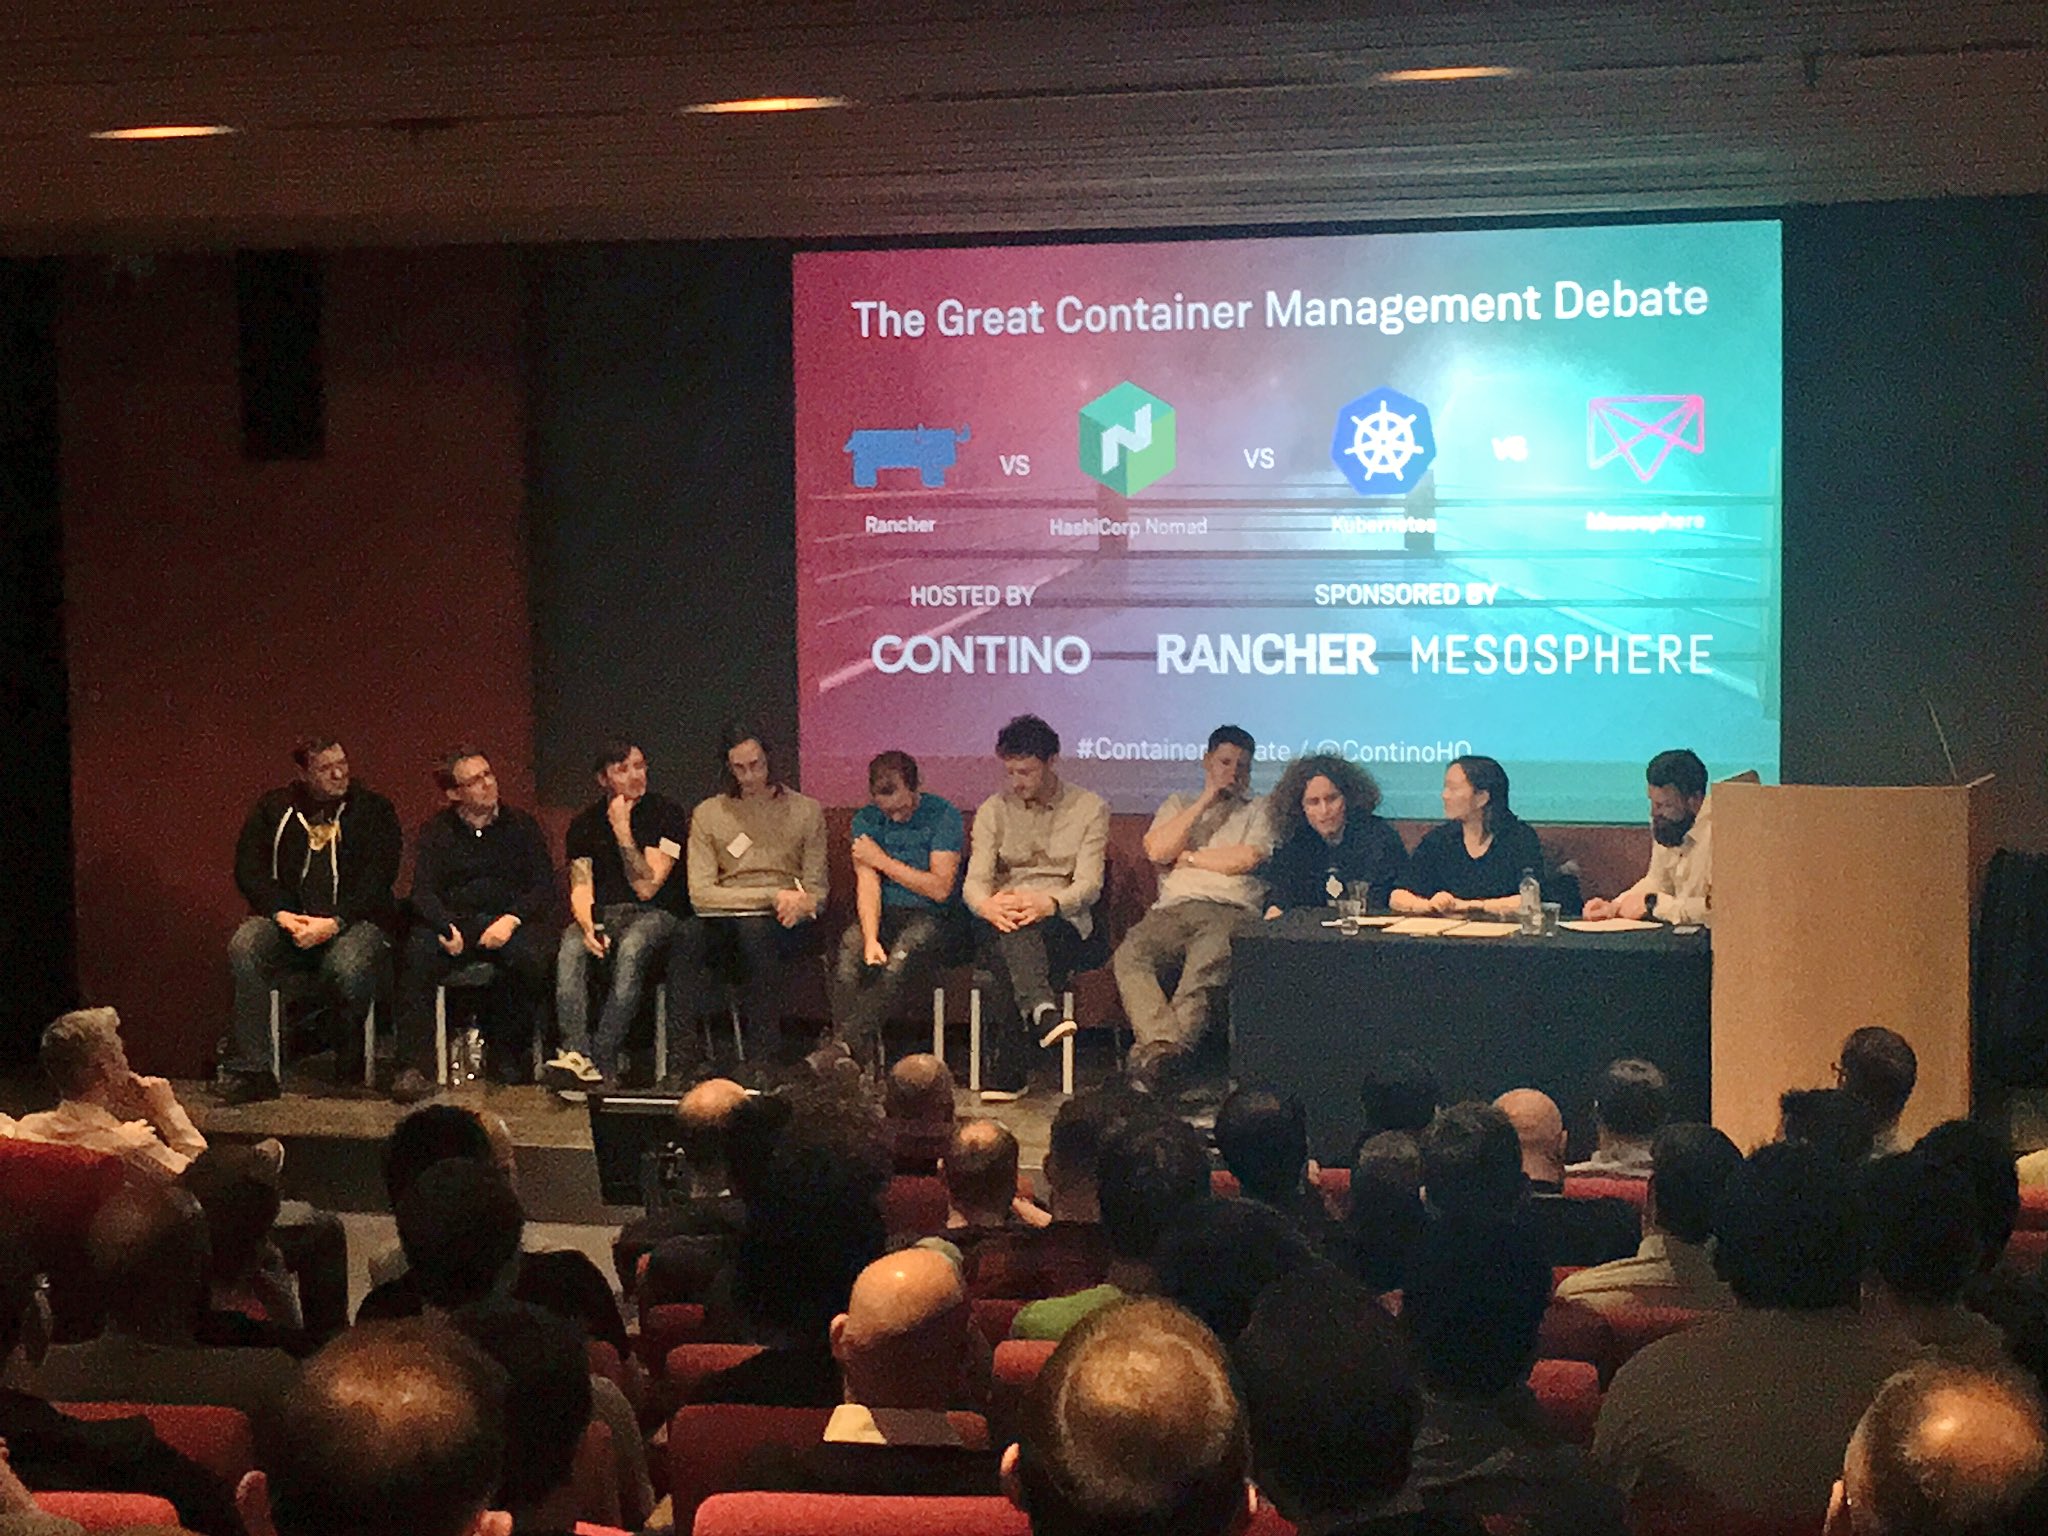 The Great Container Management Debate